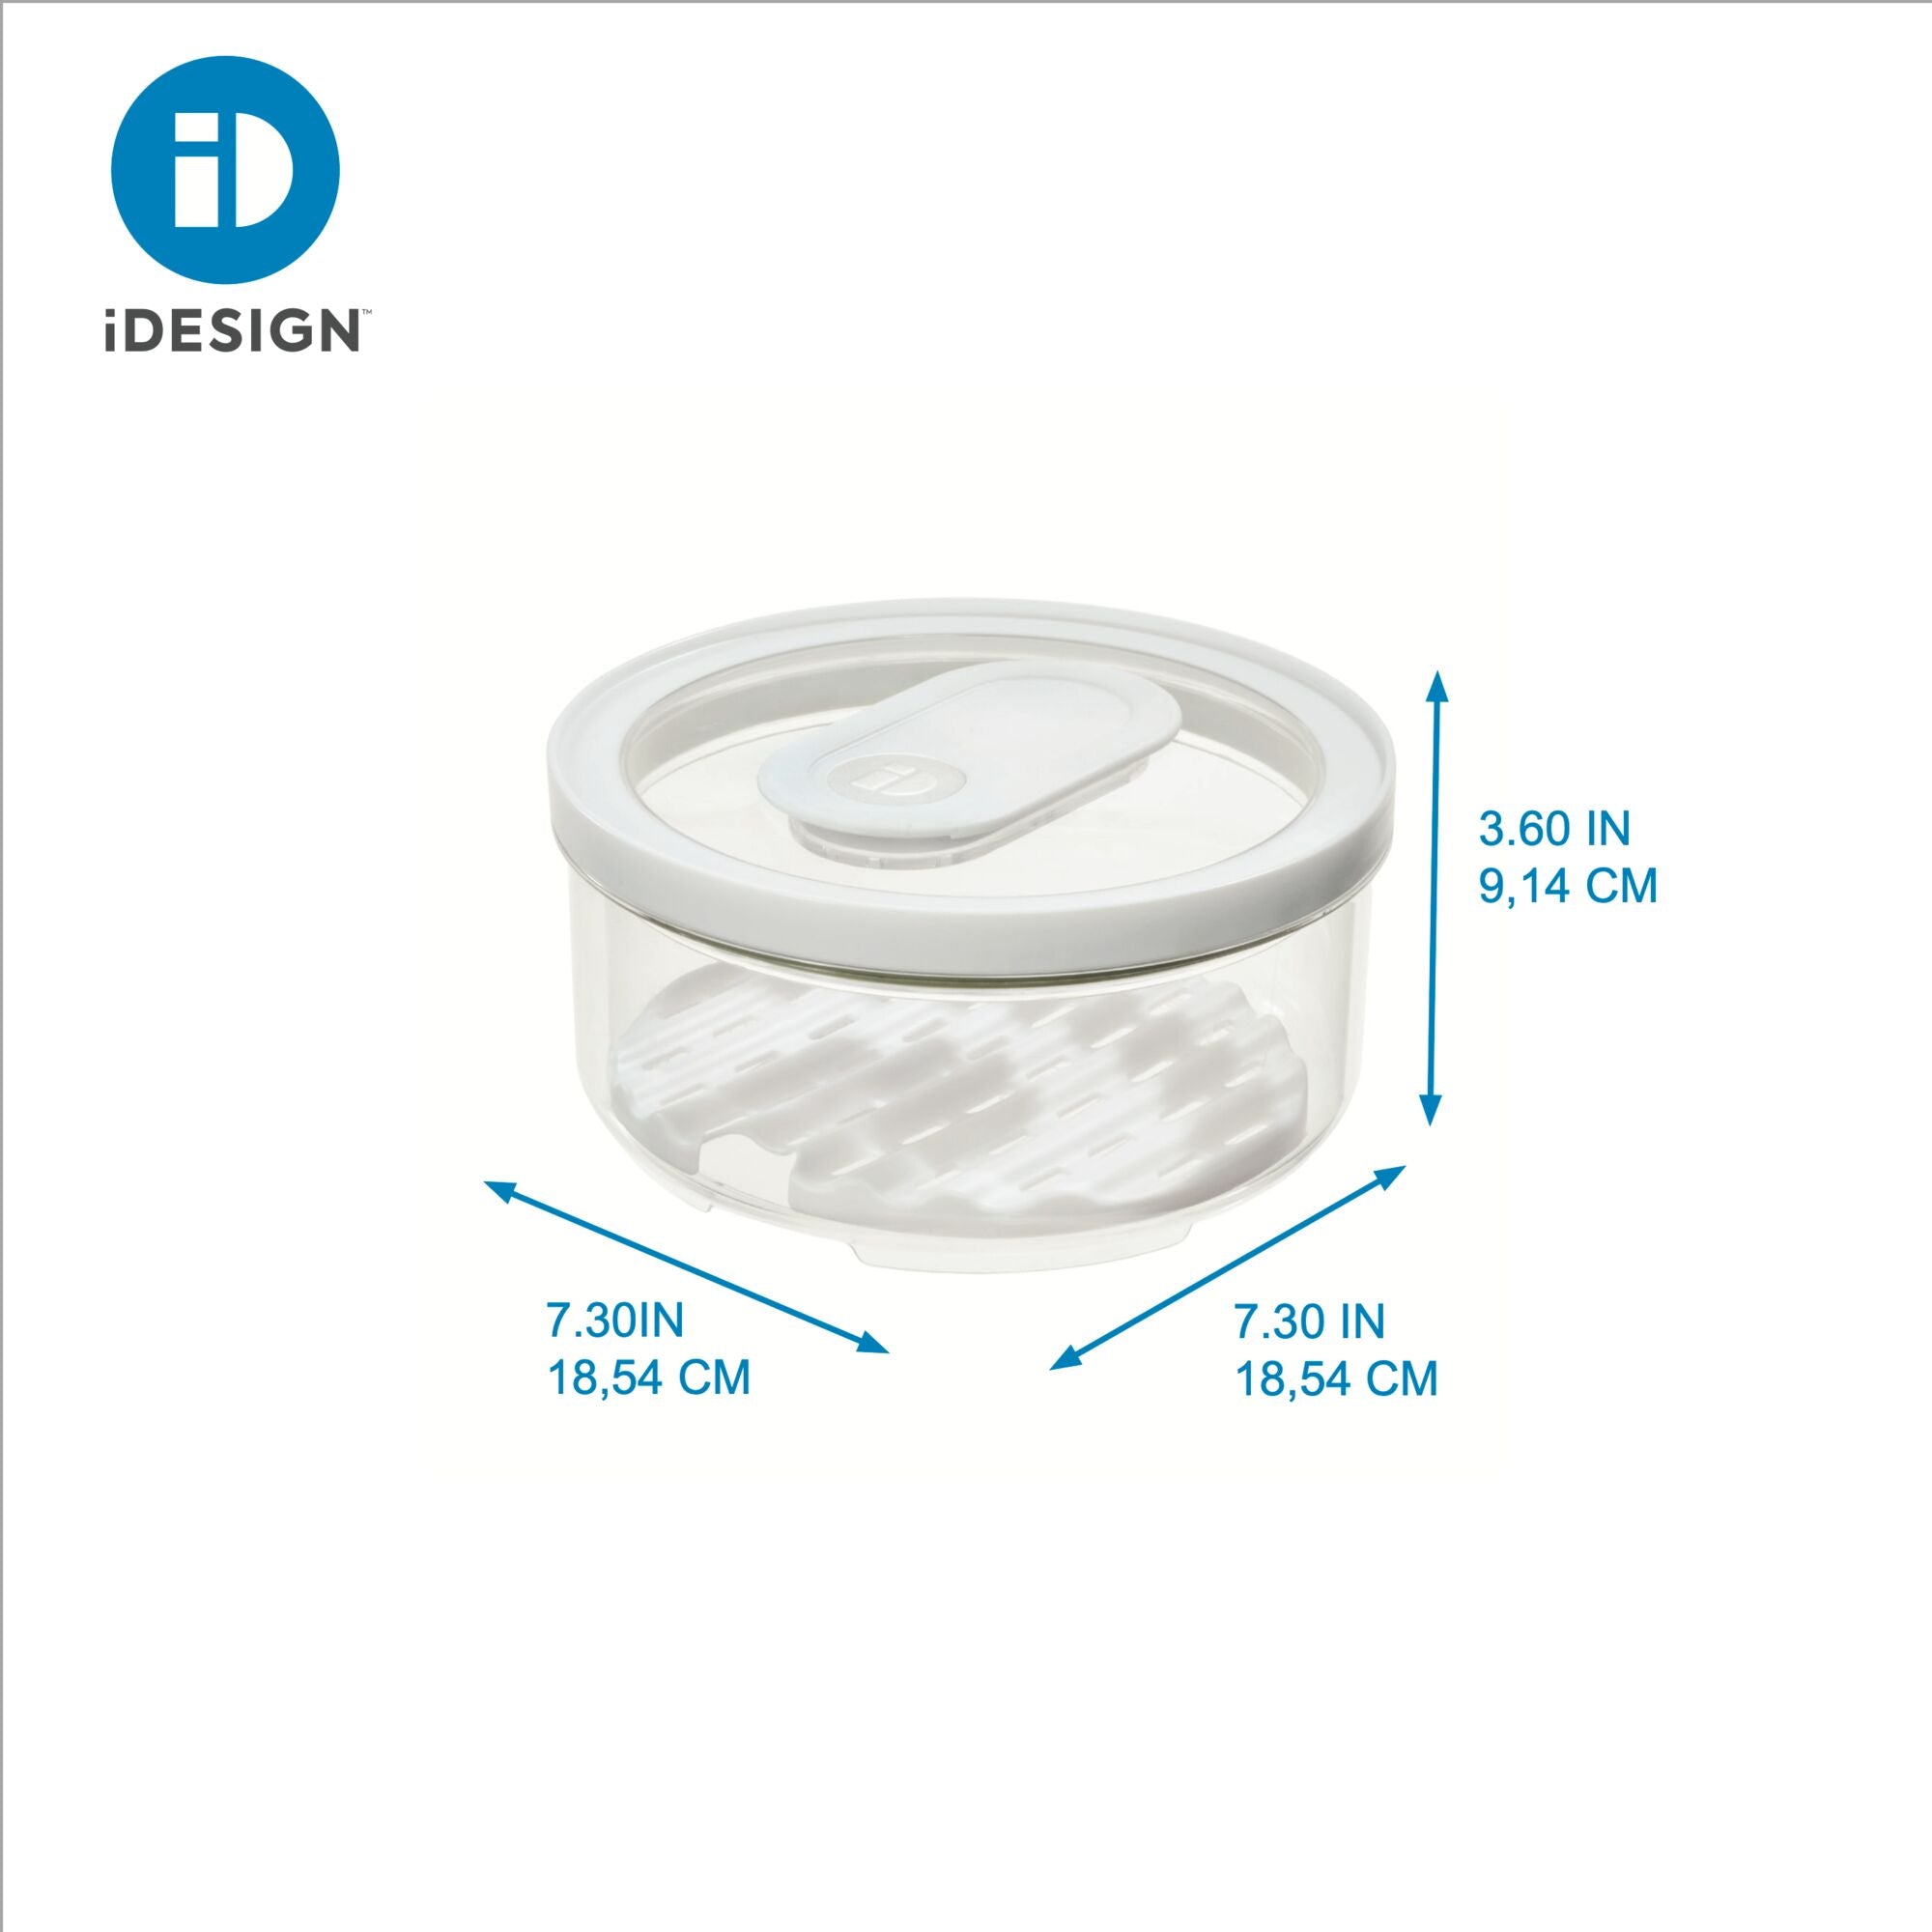 iDesign Eco Divided Food Storage Containers Made from Recycled Plastic